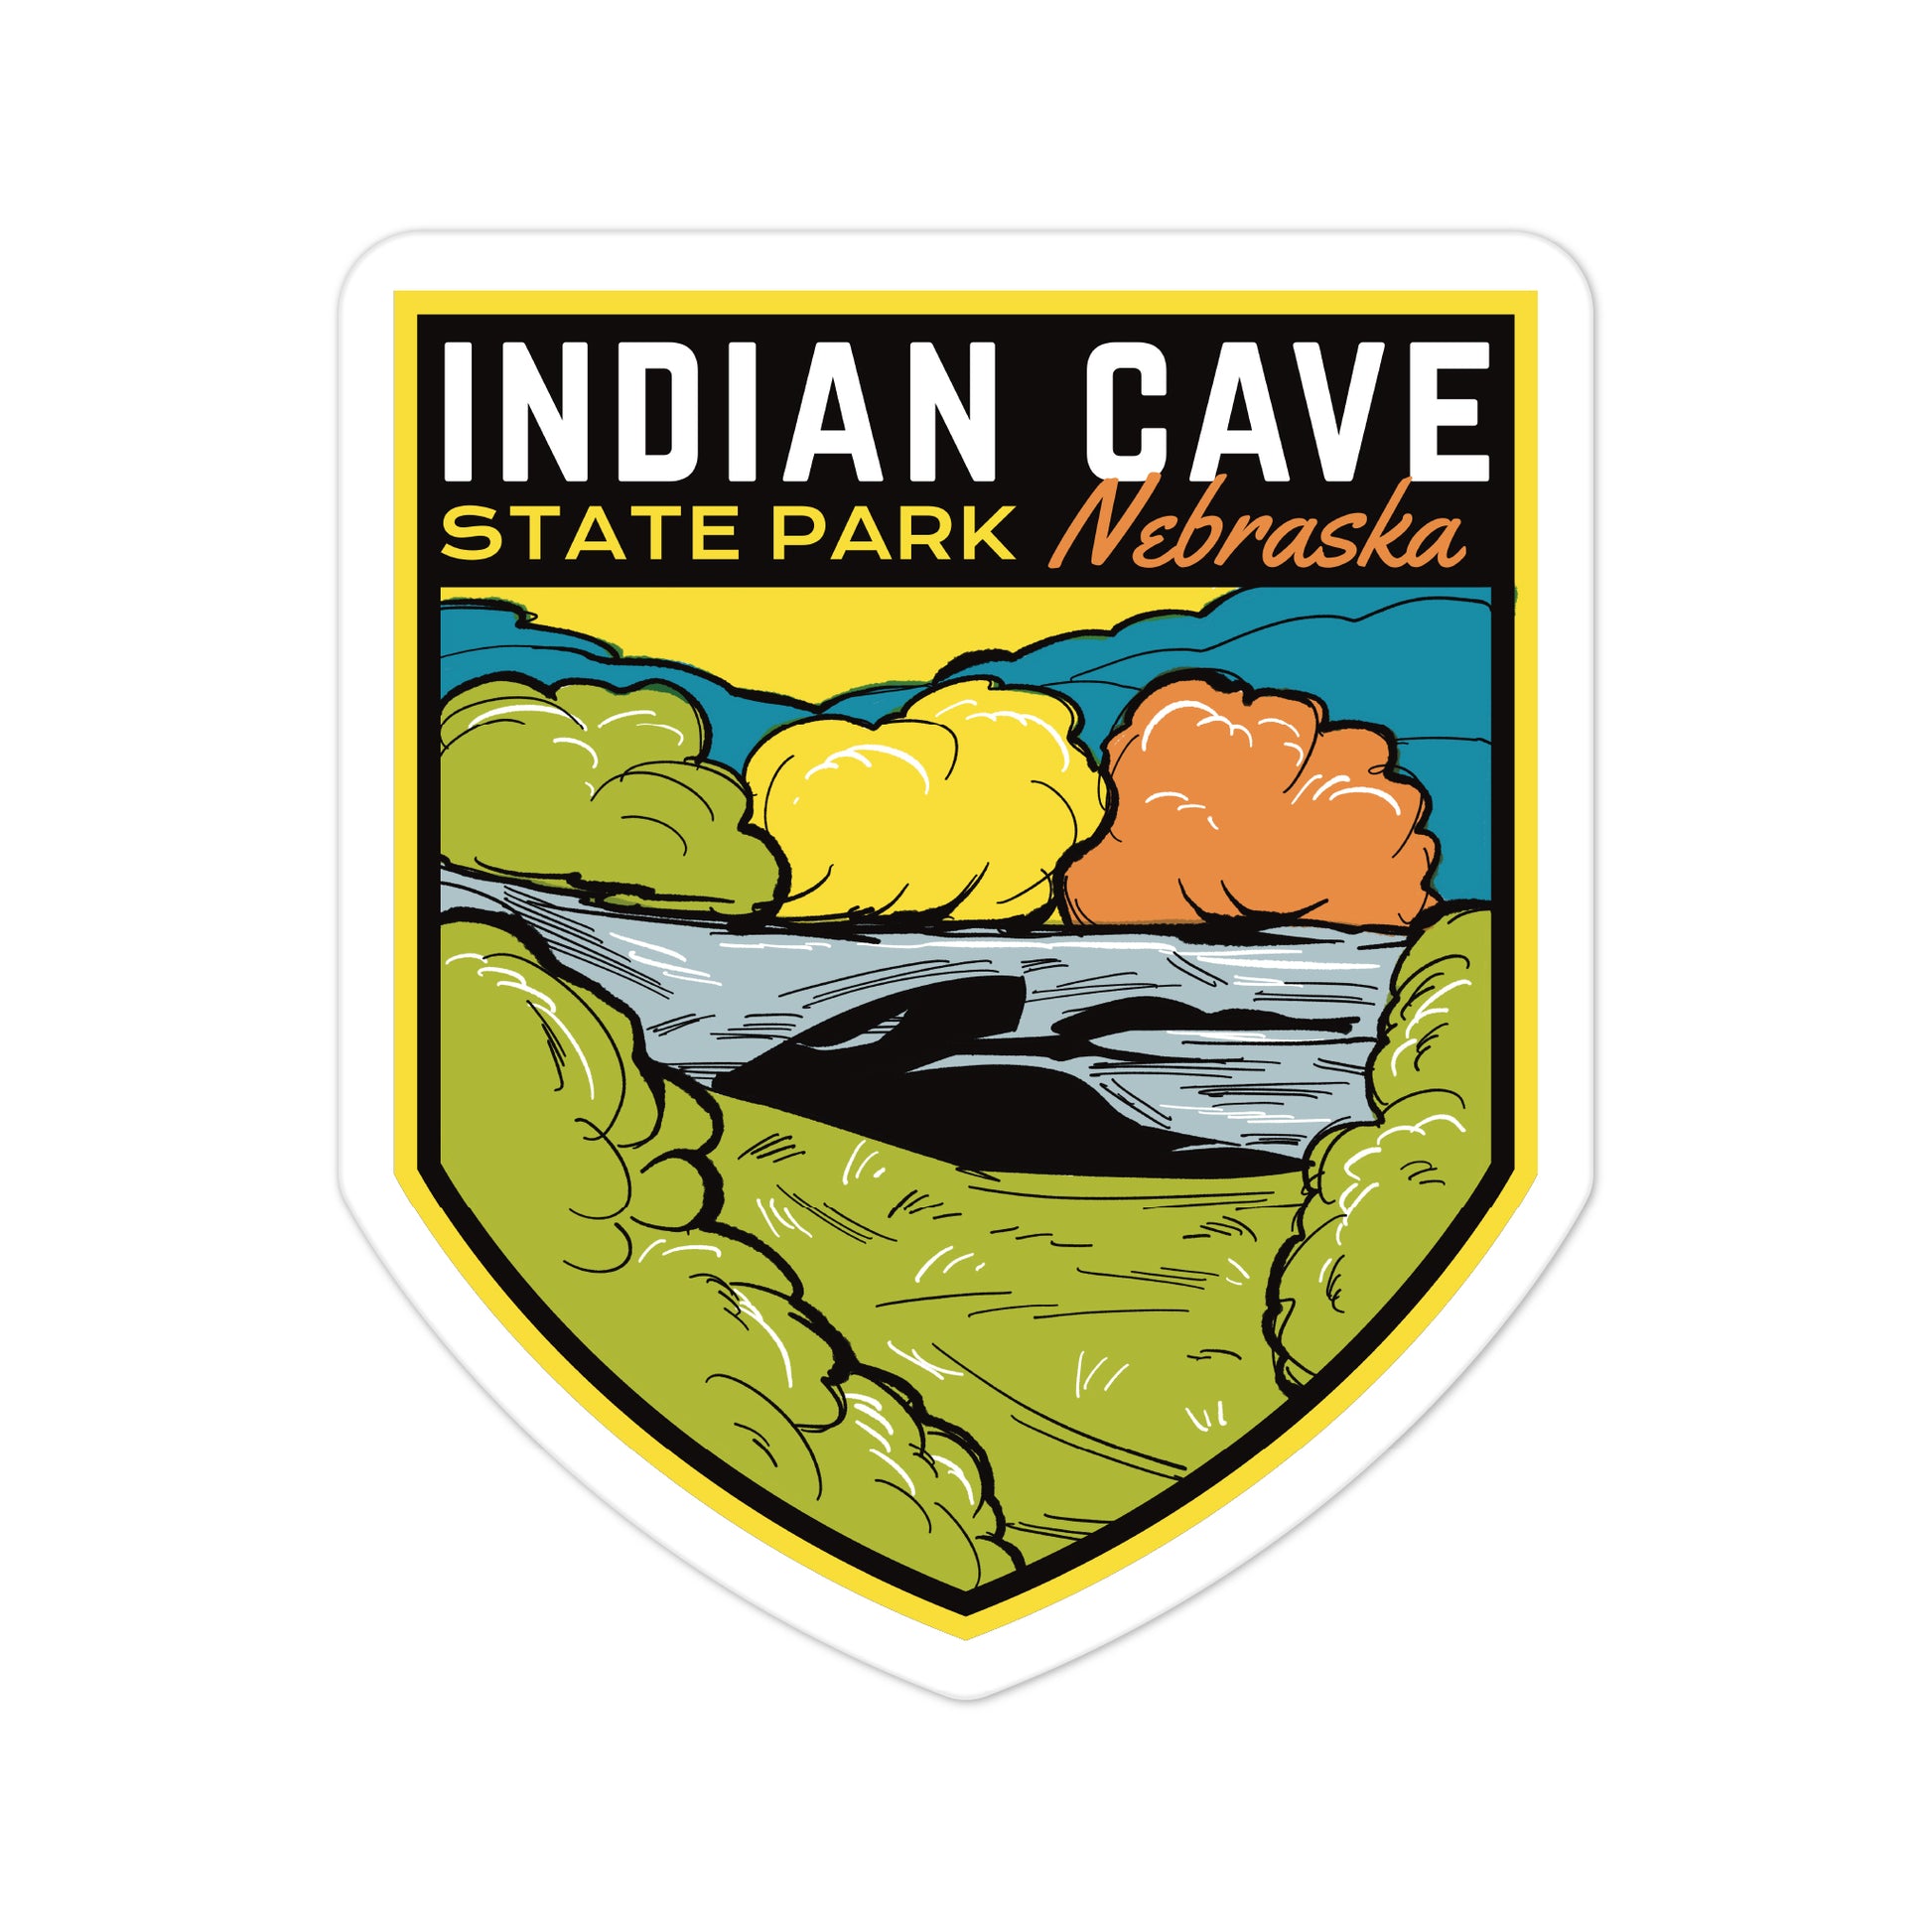 A sticker of Indian Cave State Park